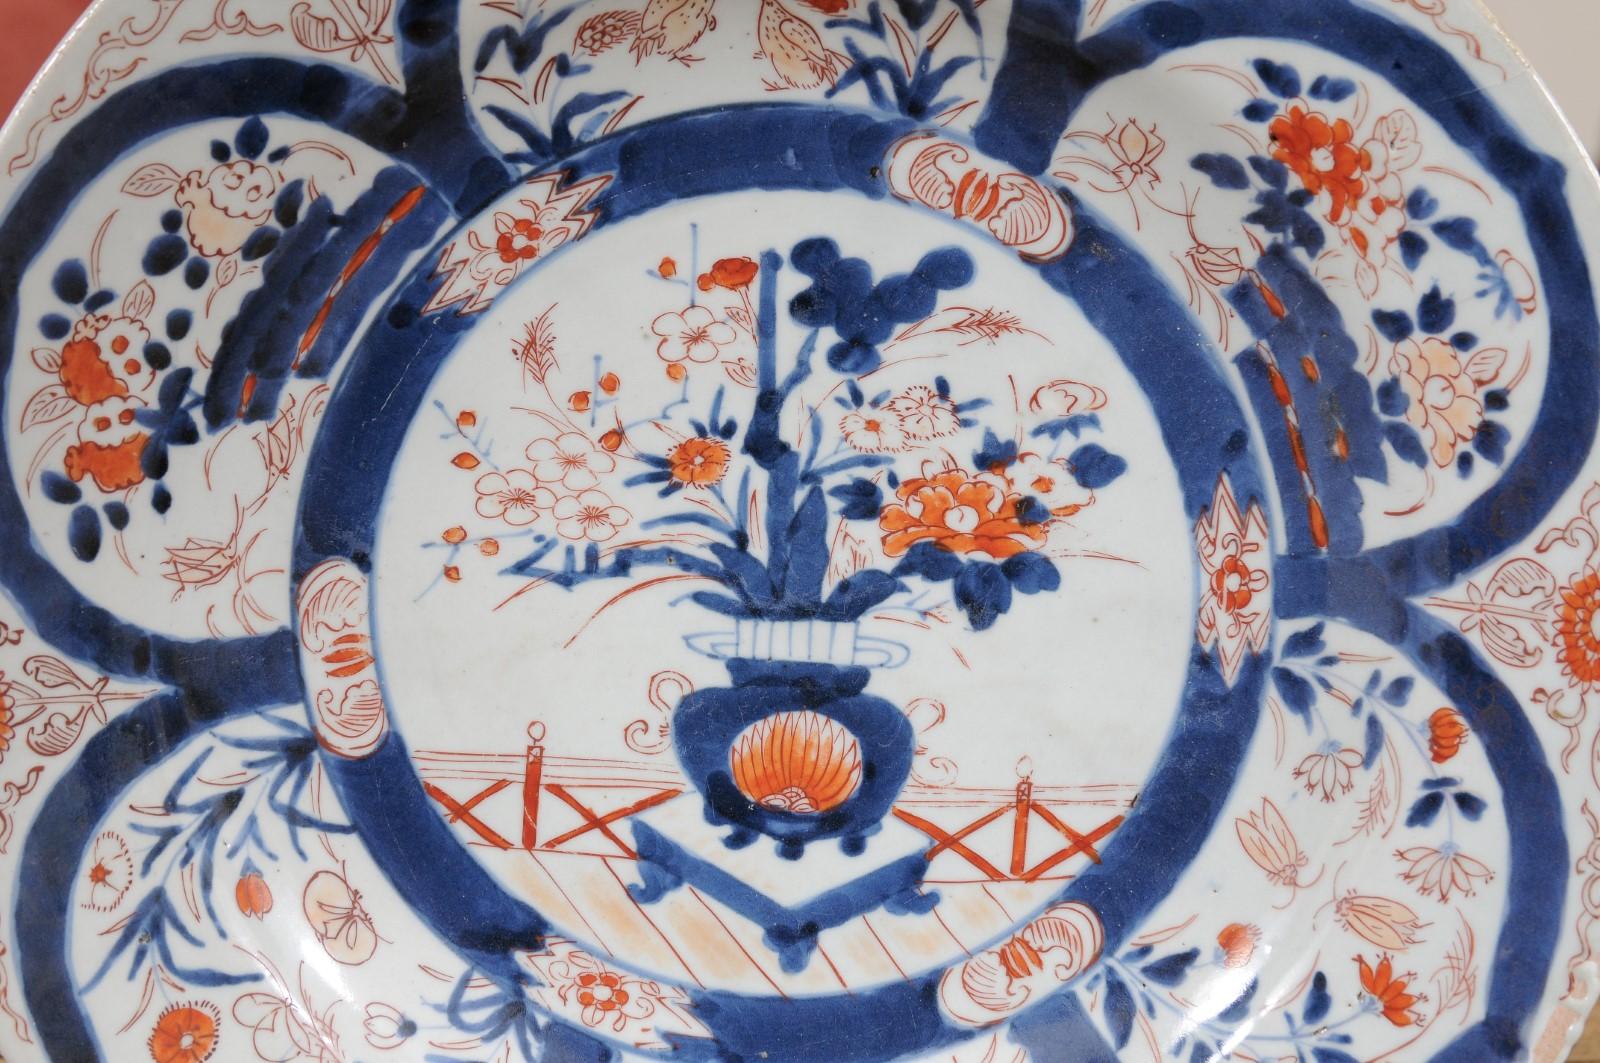 Large 18th Century Chinese Export Imari Porcelain Charger For Sale 3